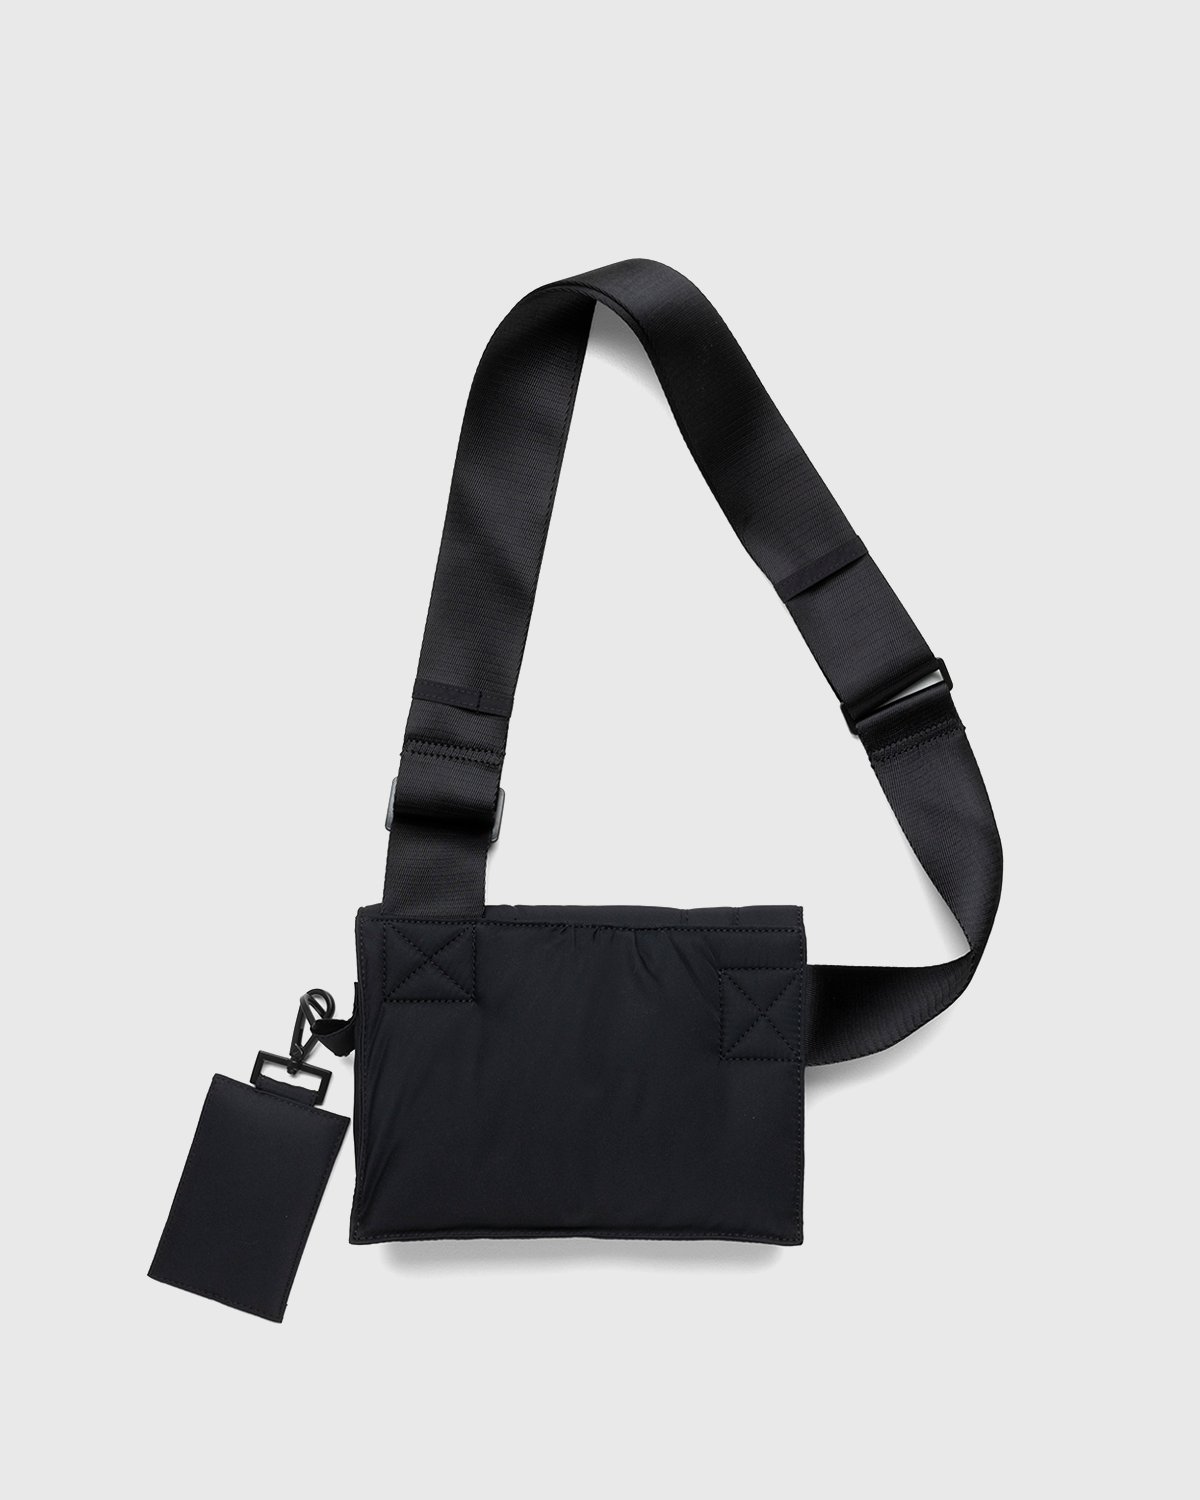 A-Cold-Wall* - Convect Holster Bag Black - Accessories - Black - Image 2